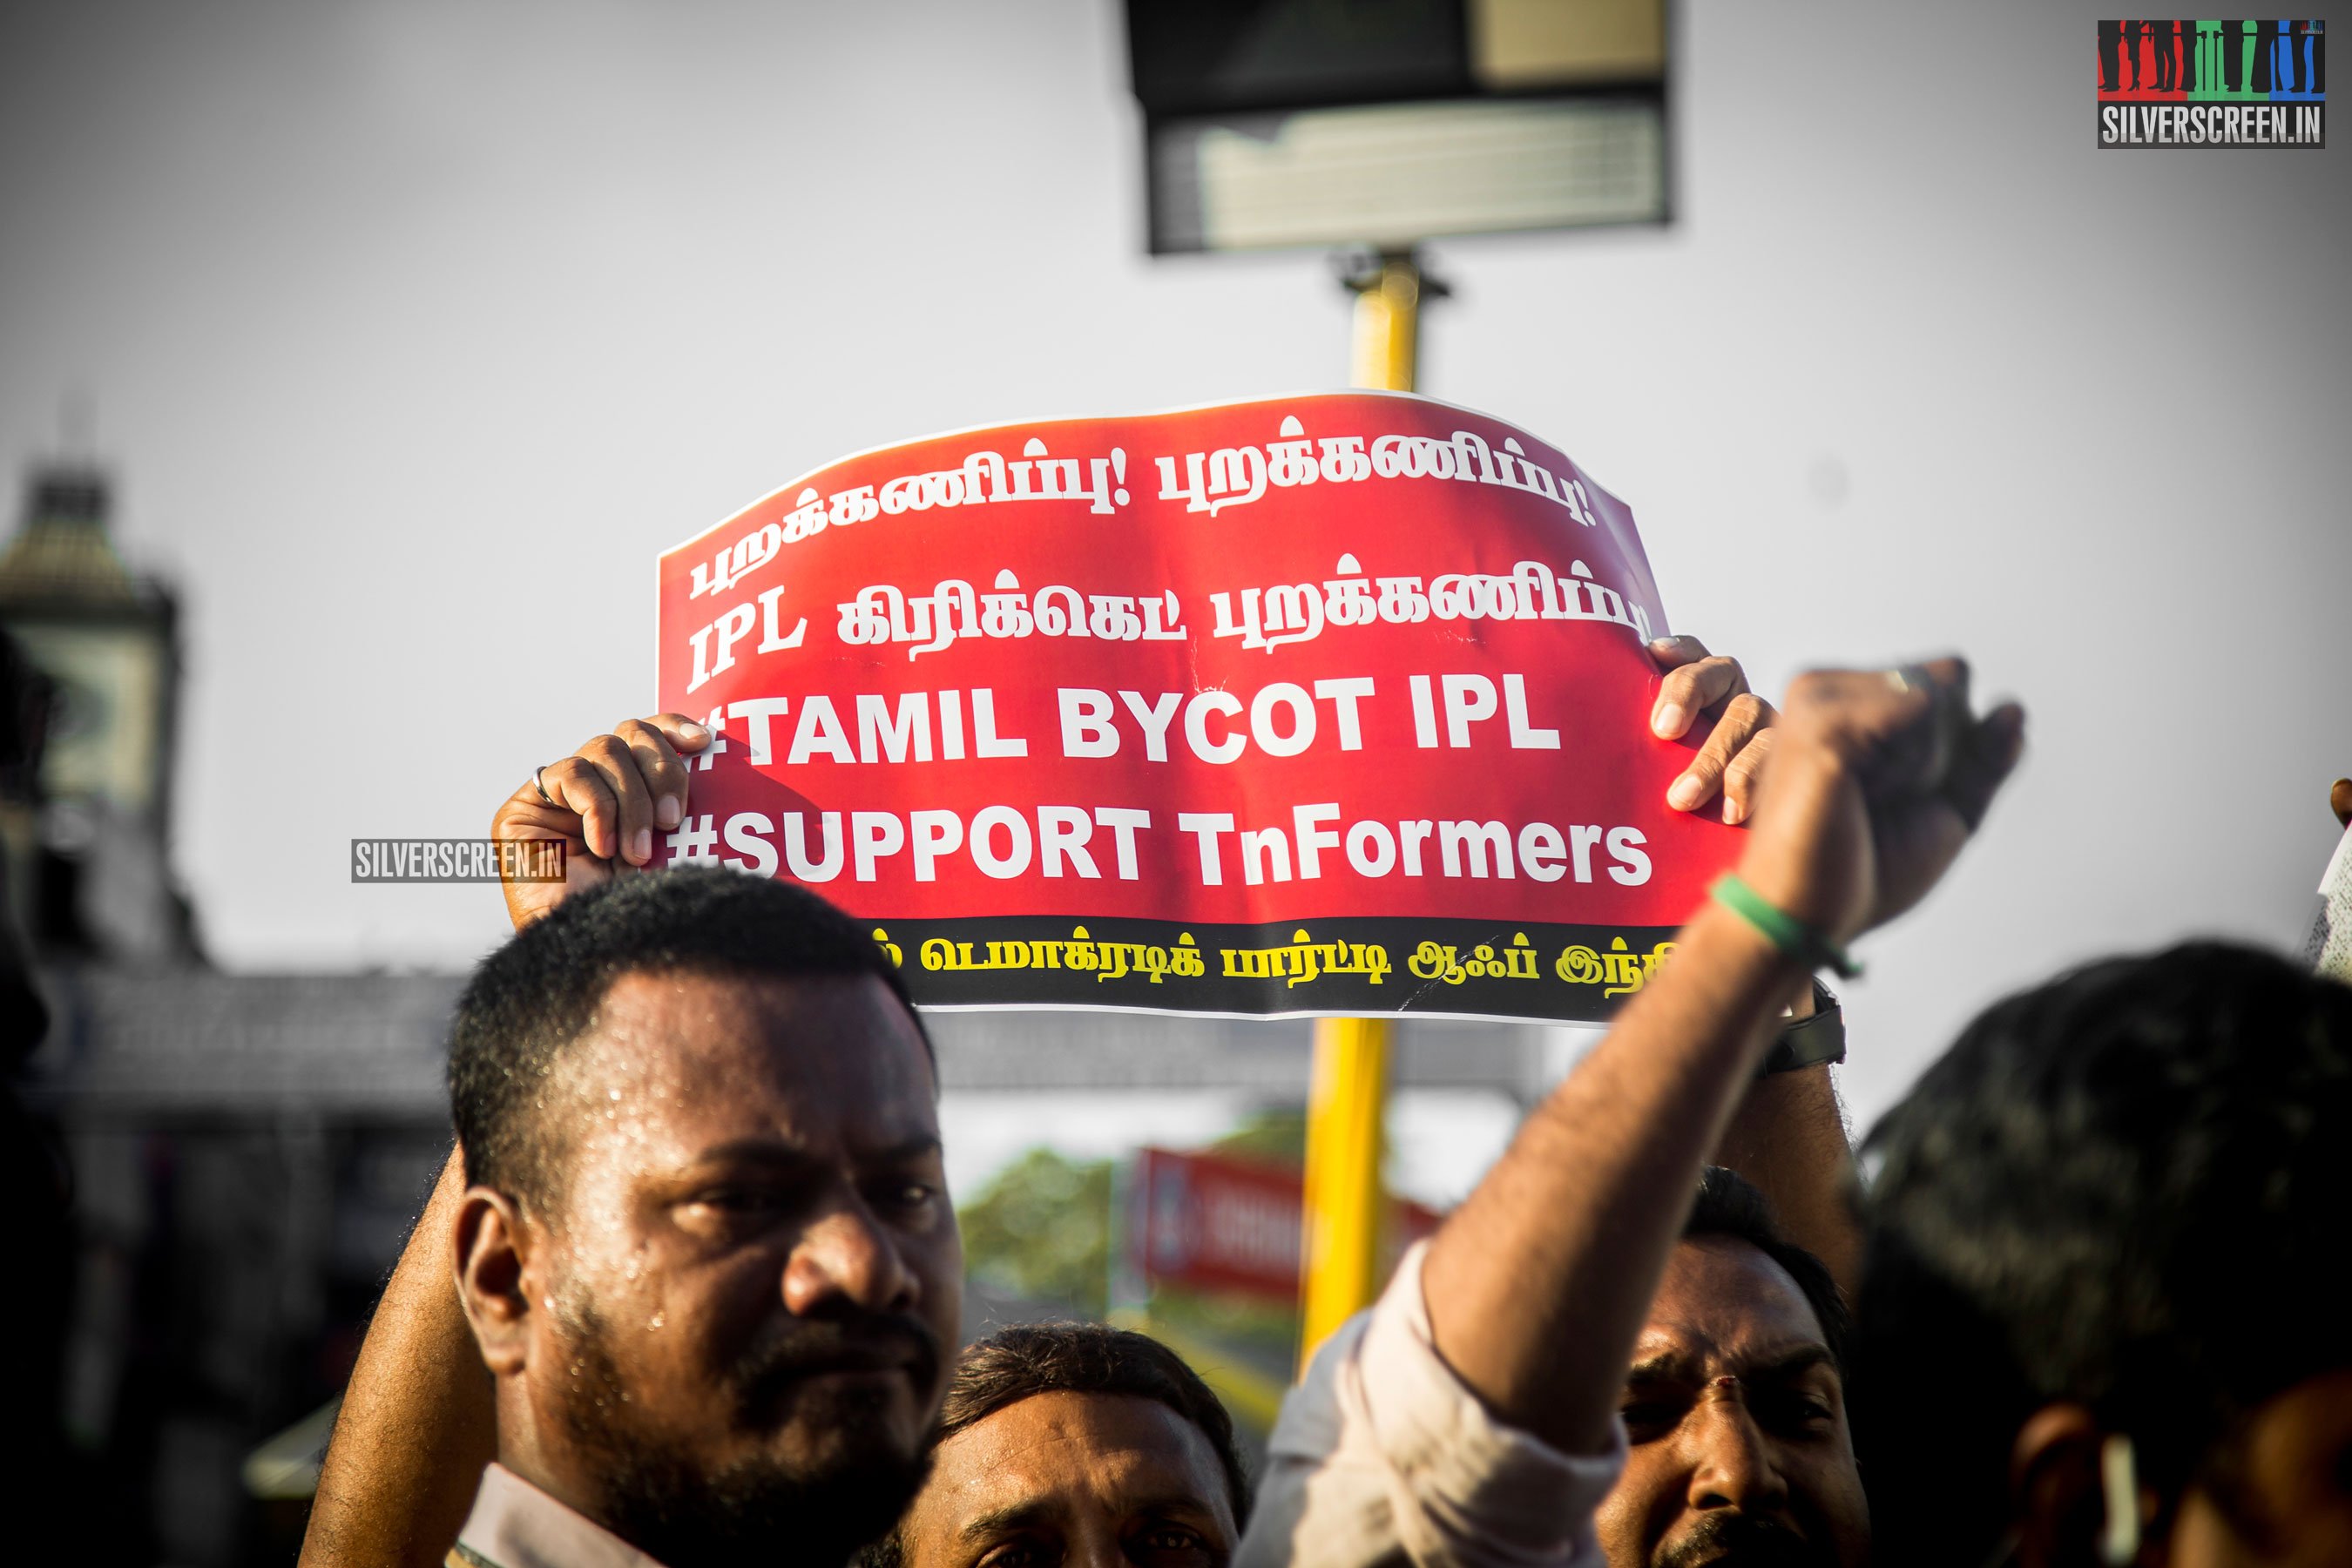 Protest Against The IPL Match In Chennai